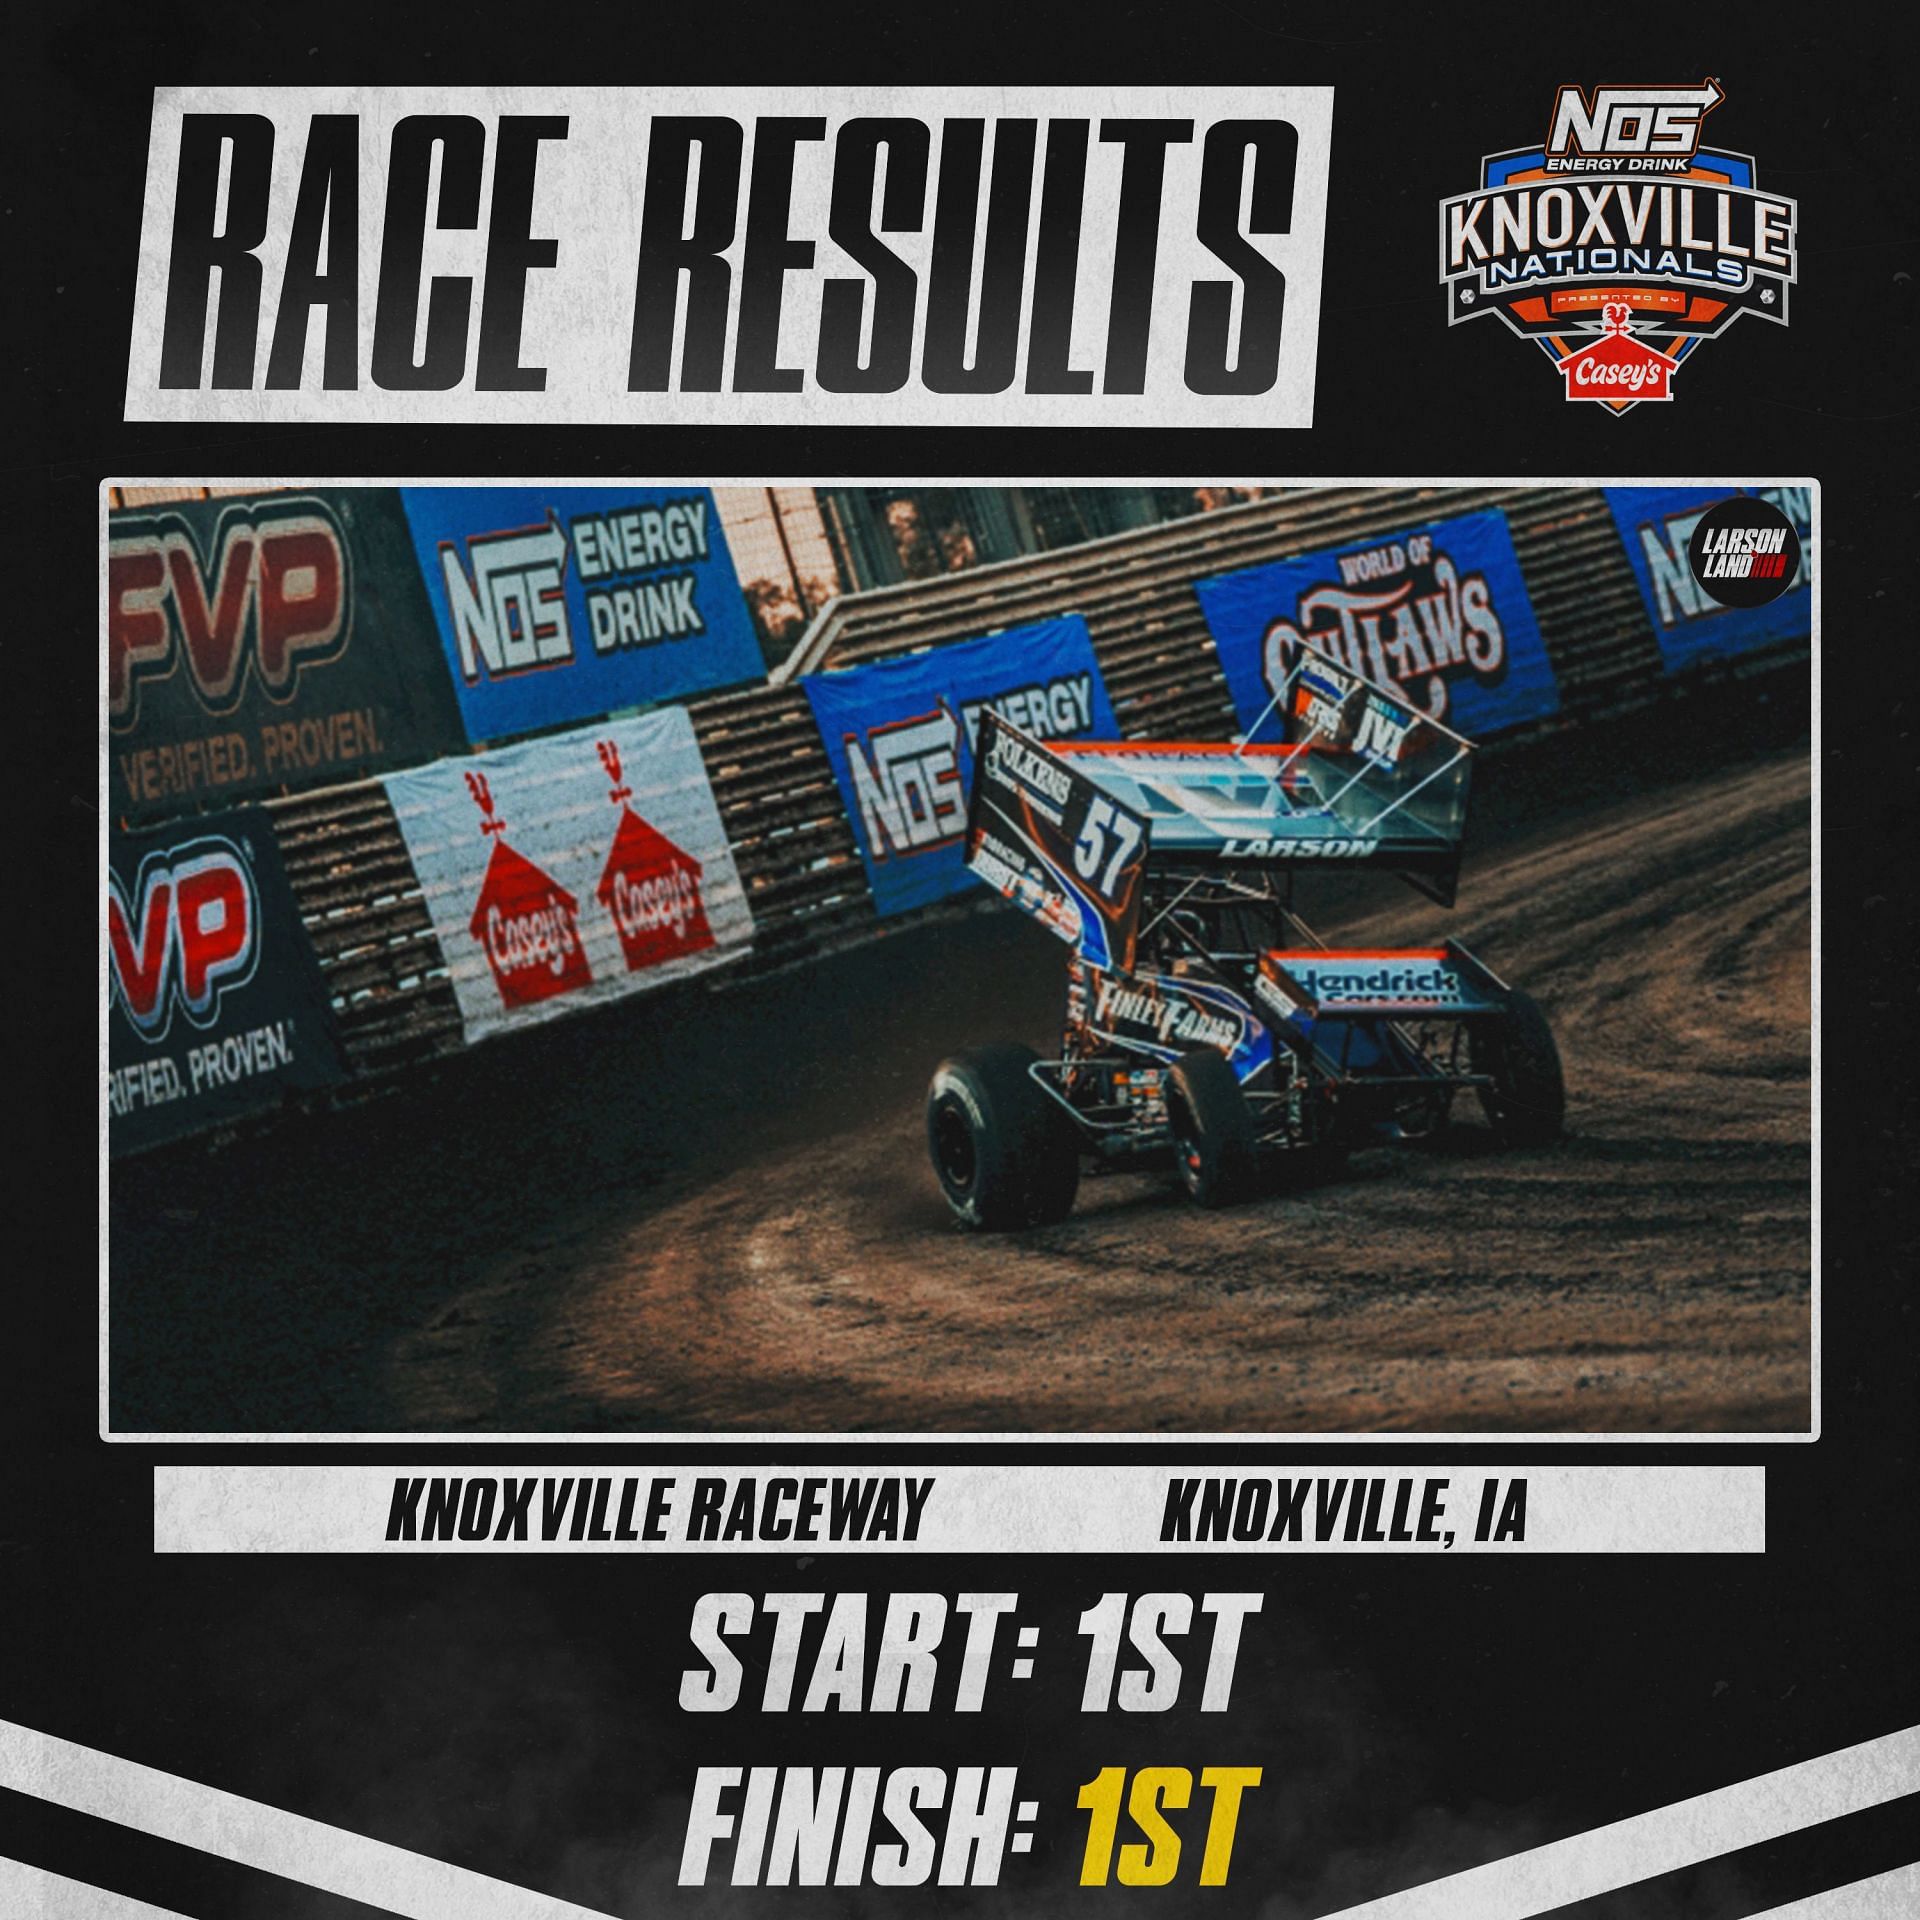 Kyle Larson wins second Knoxville Nationals after leading all 50 laps